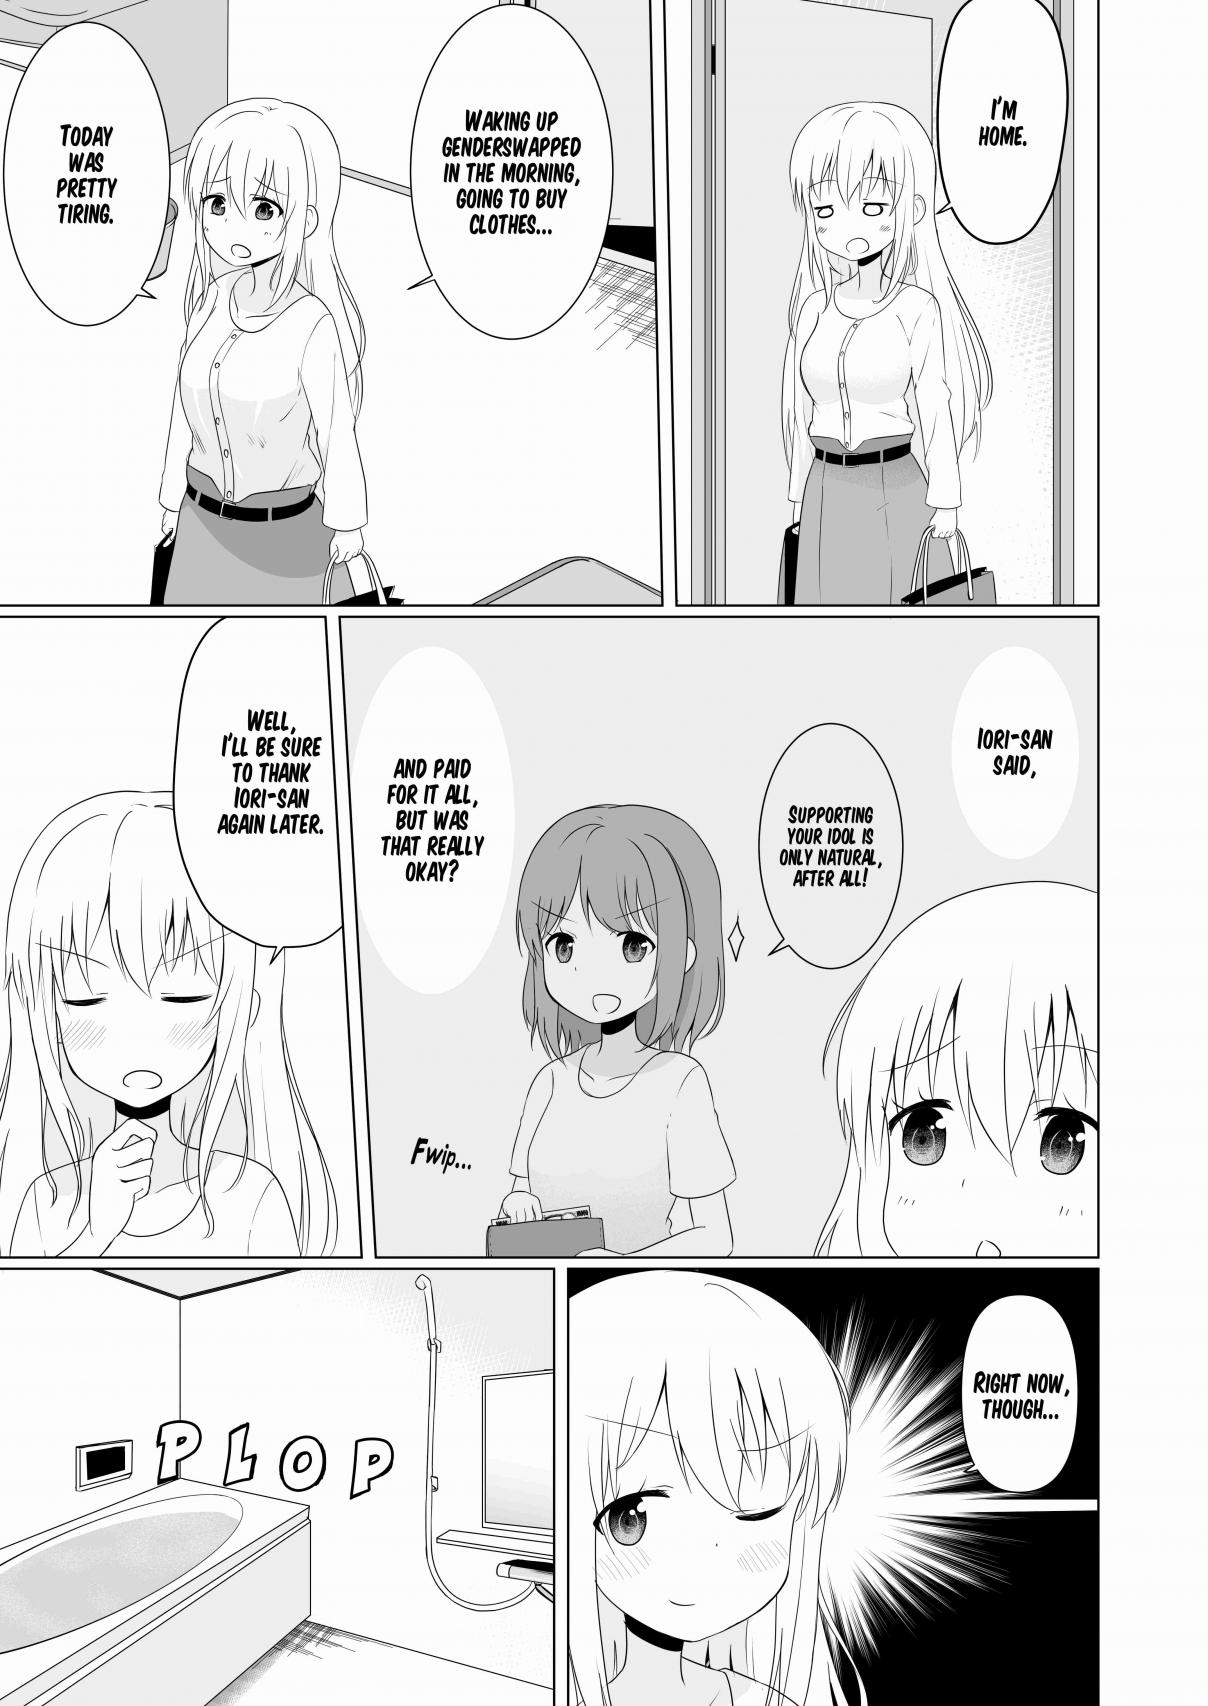 A Boy who Loves Genderswap got Genderswapped so He acts out His Ideal Genderswap Girl Ch. 7